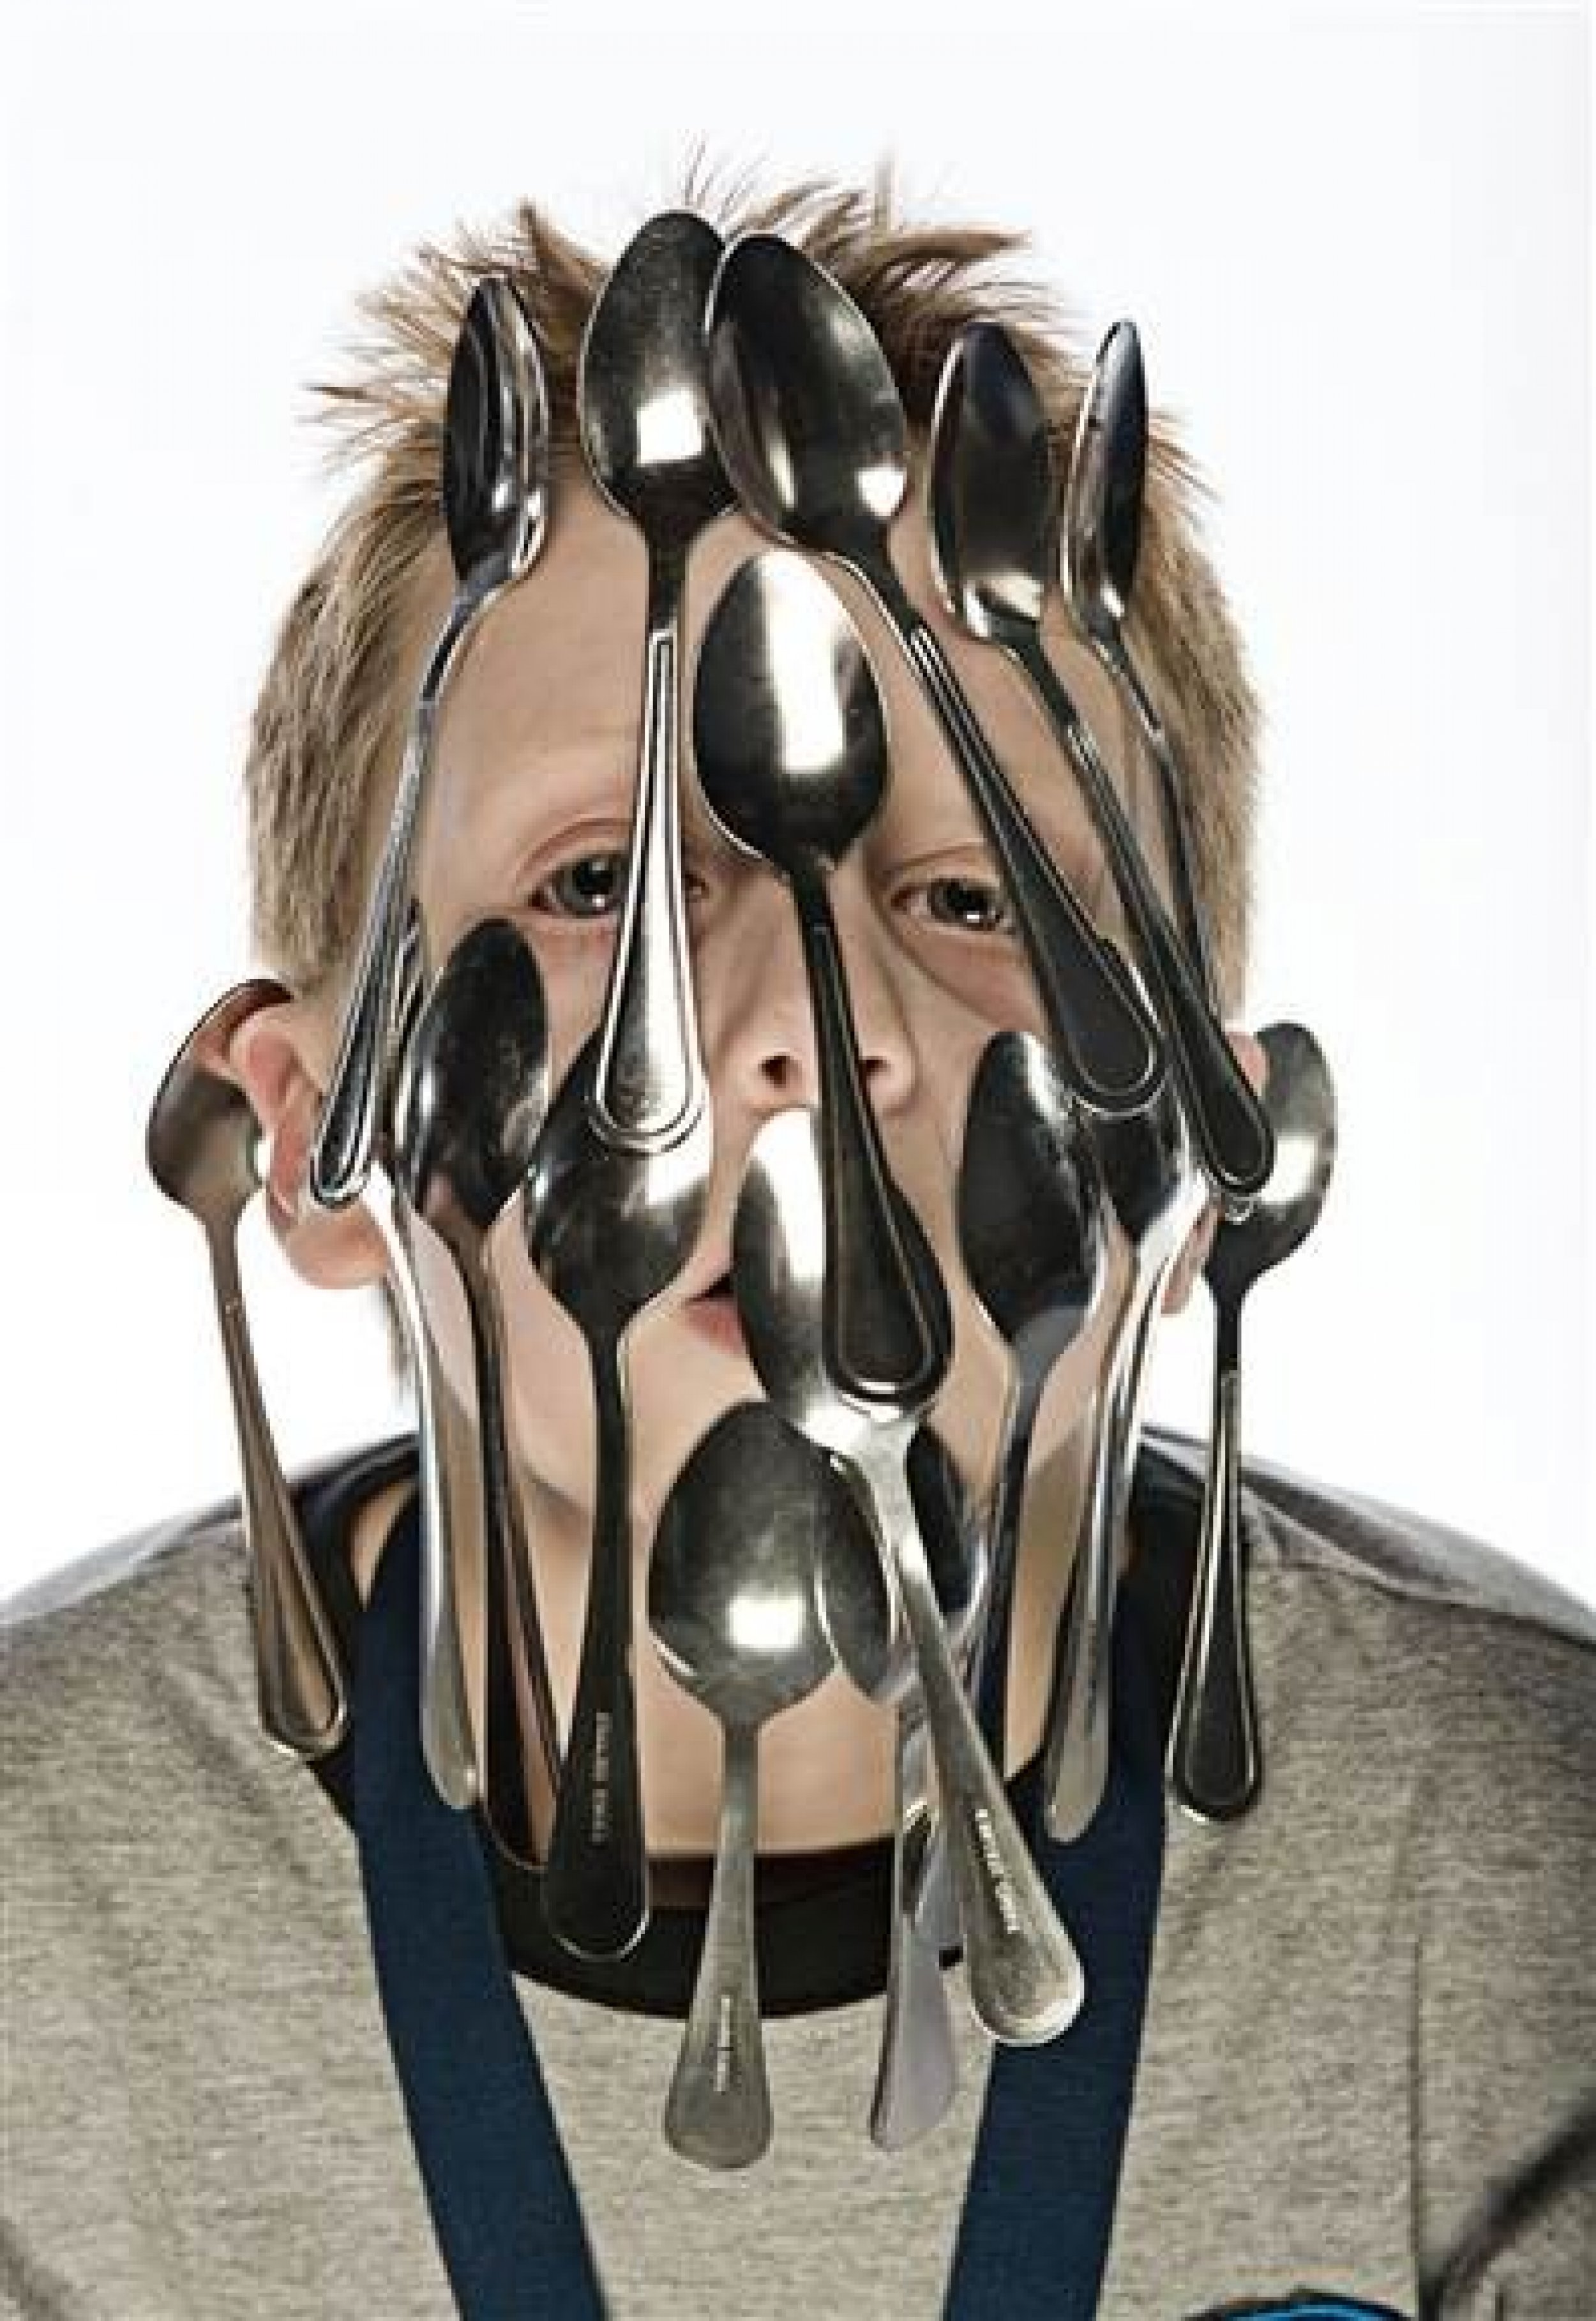 Most spoons balanced on the face